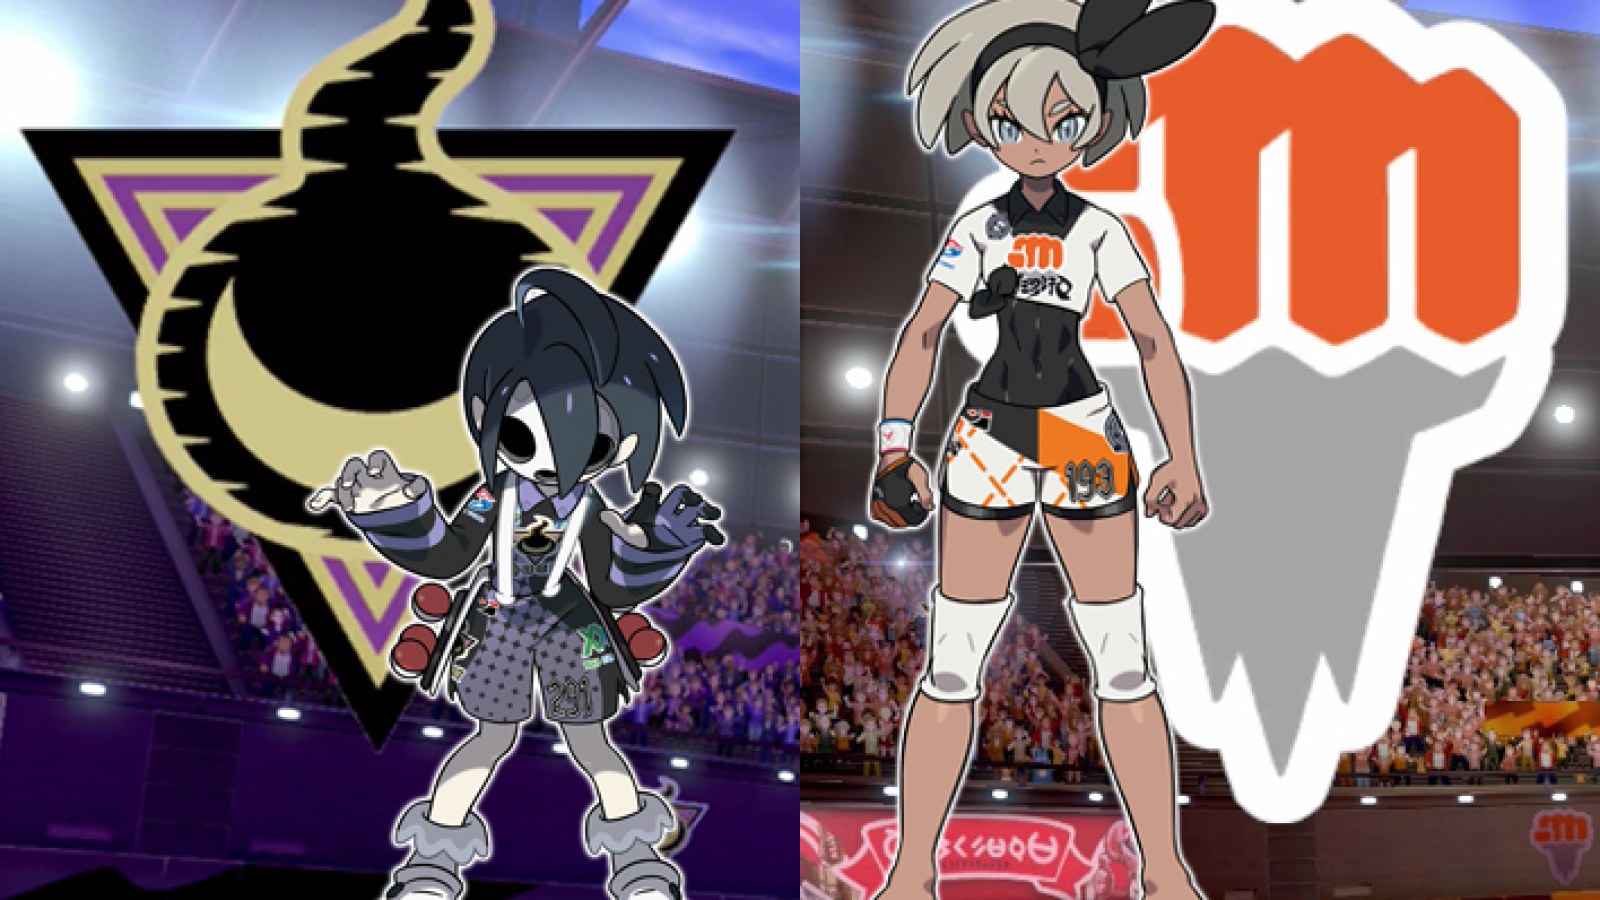 Pokémon Global News - VERSION EXCLUSIVES There are several differences  between Pokémon Sword and Pokémon Shield, and one such difference is the  species of Pokémon that appear.